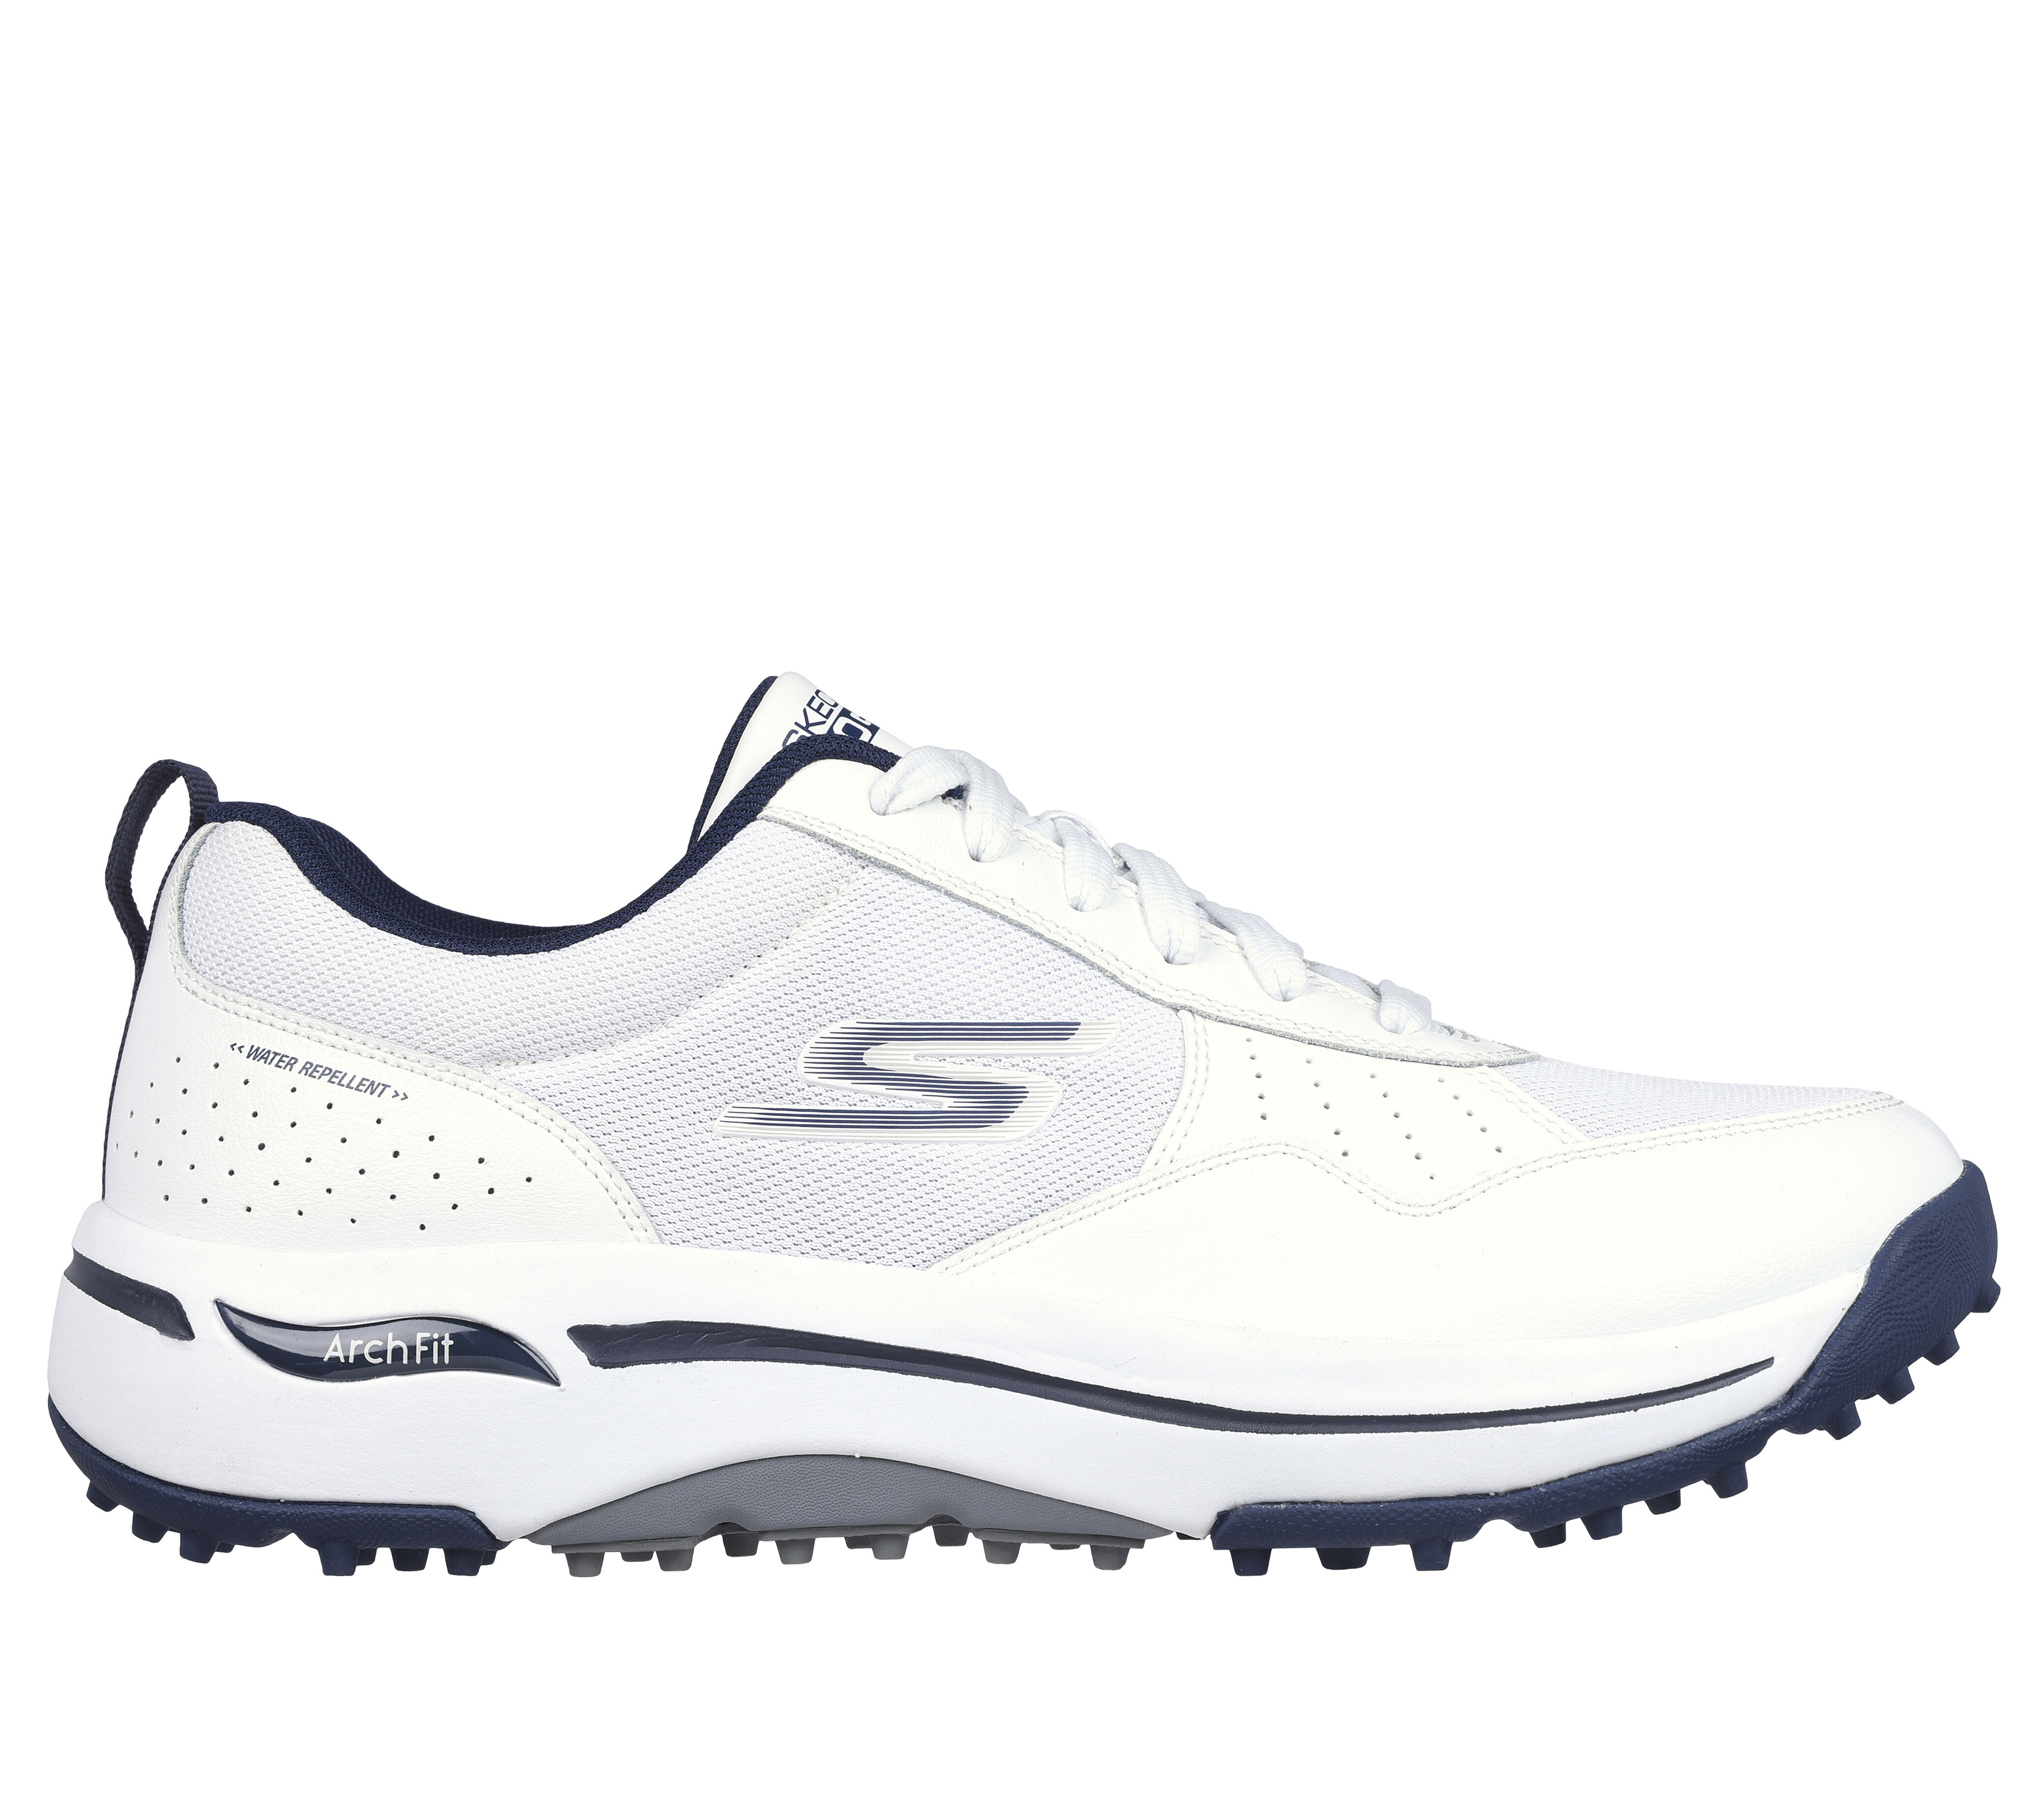 skechers white leather shoes